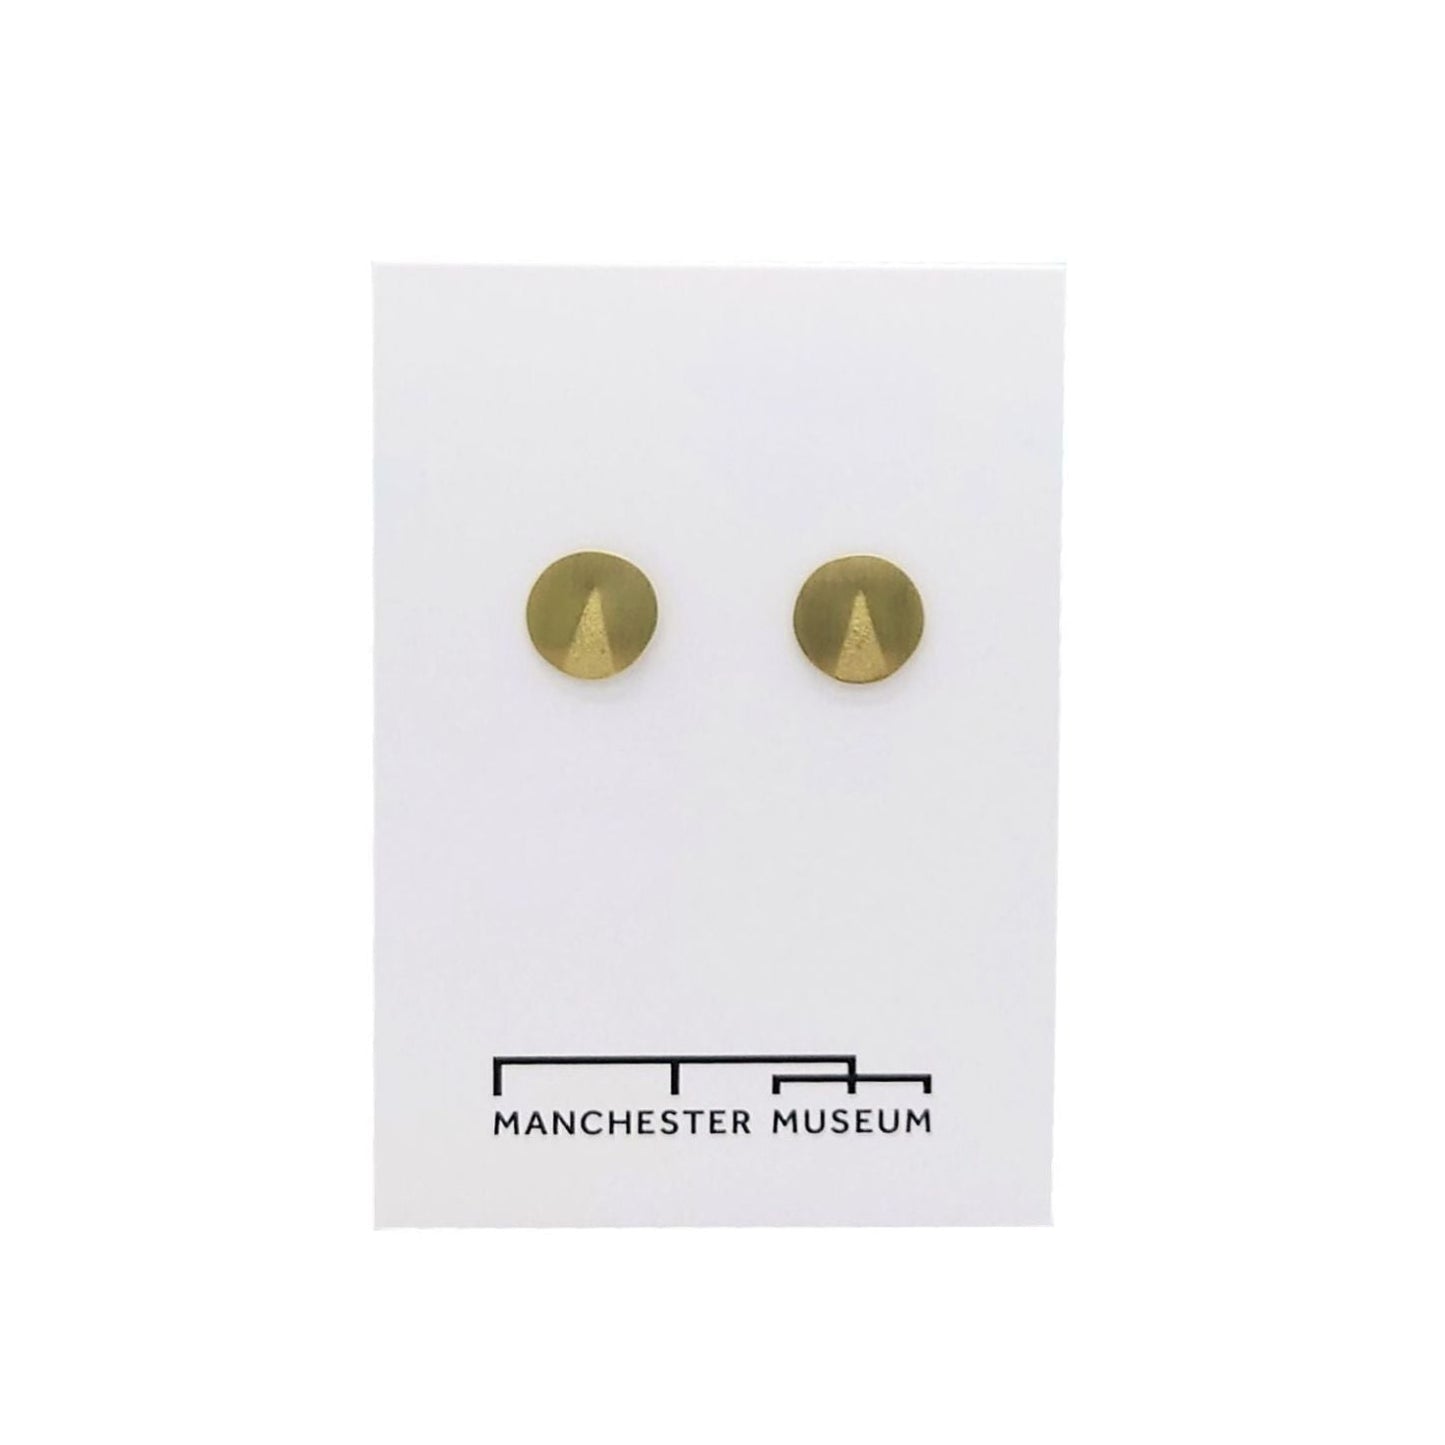 Round brass studs on the white, museum branded backing card.